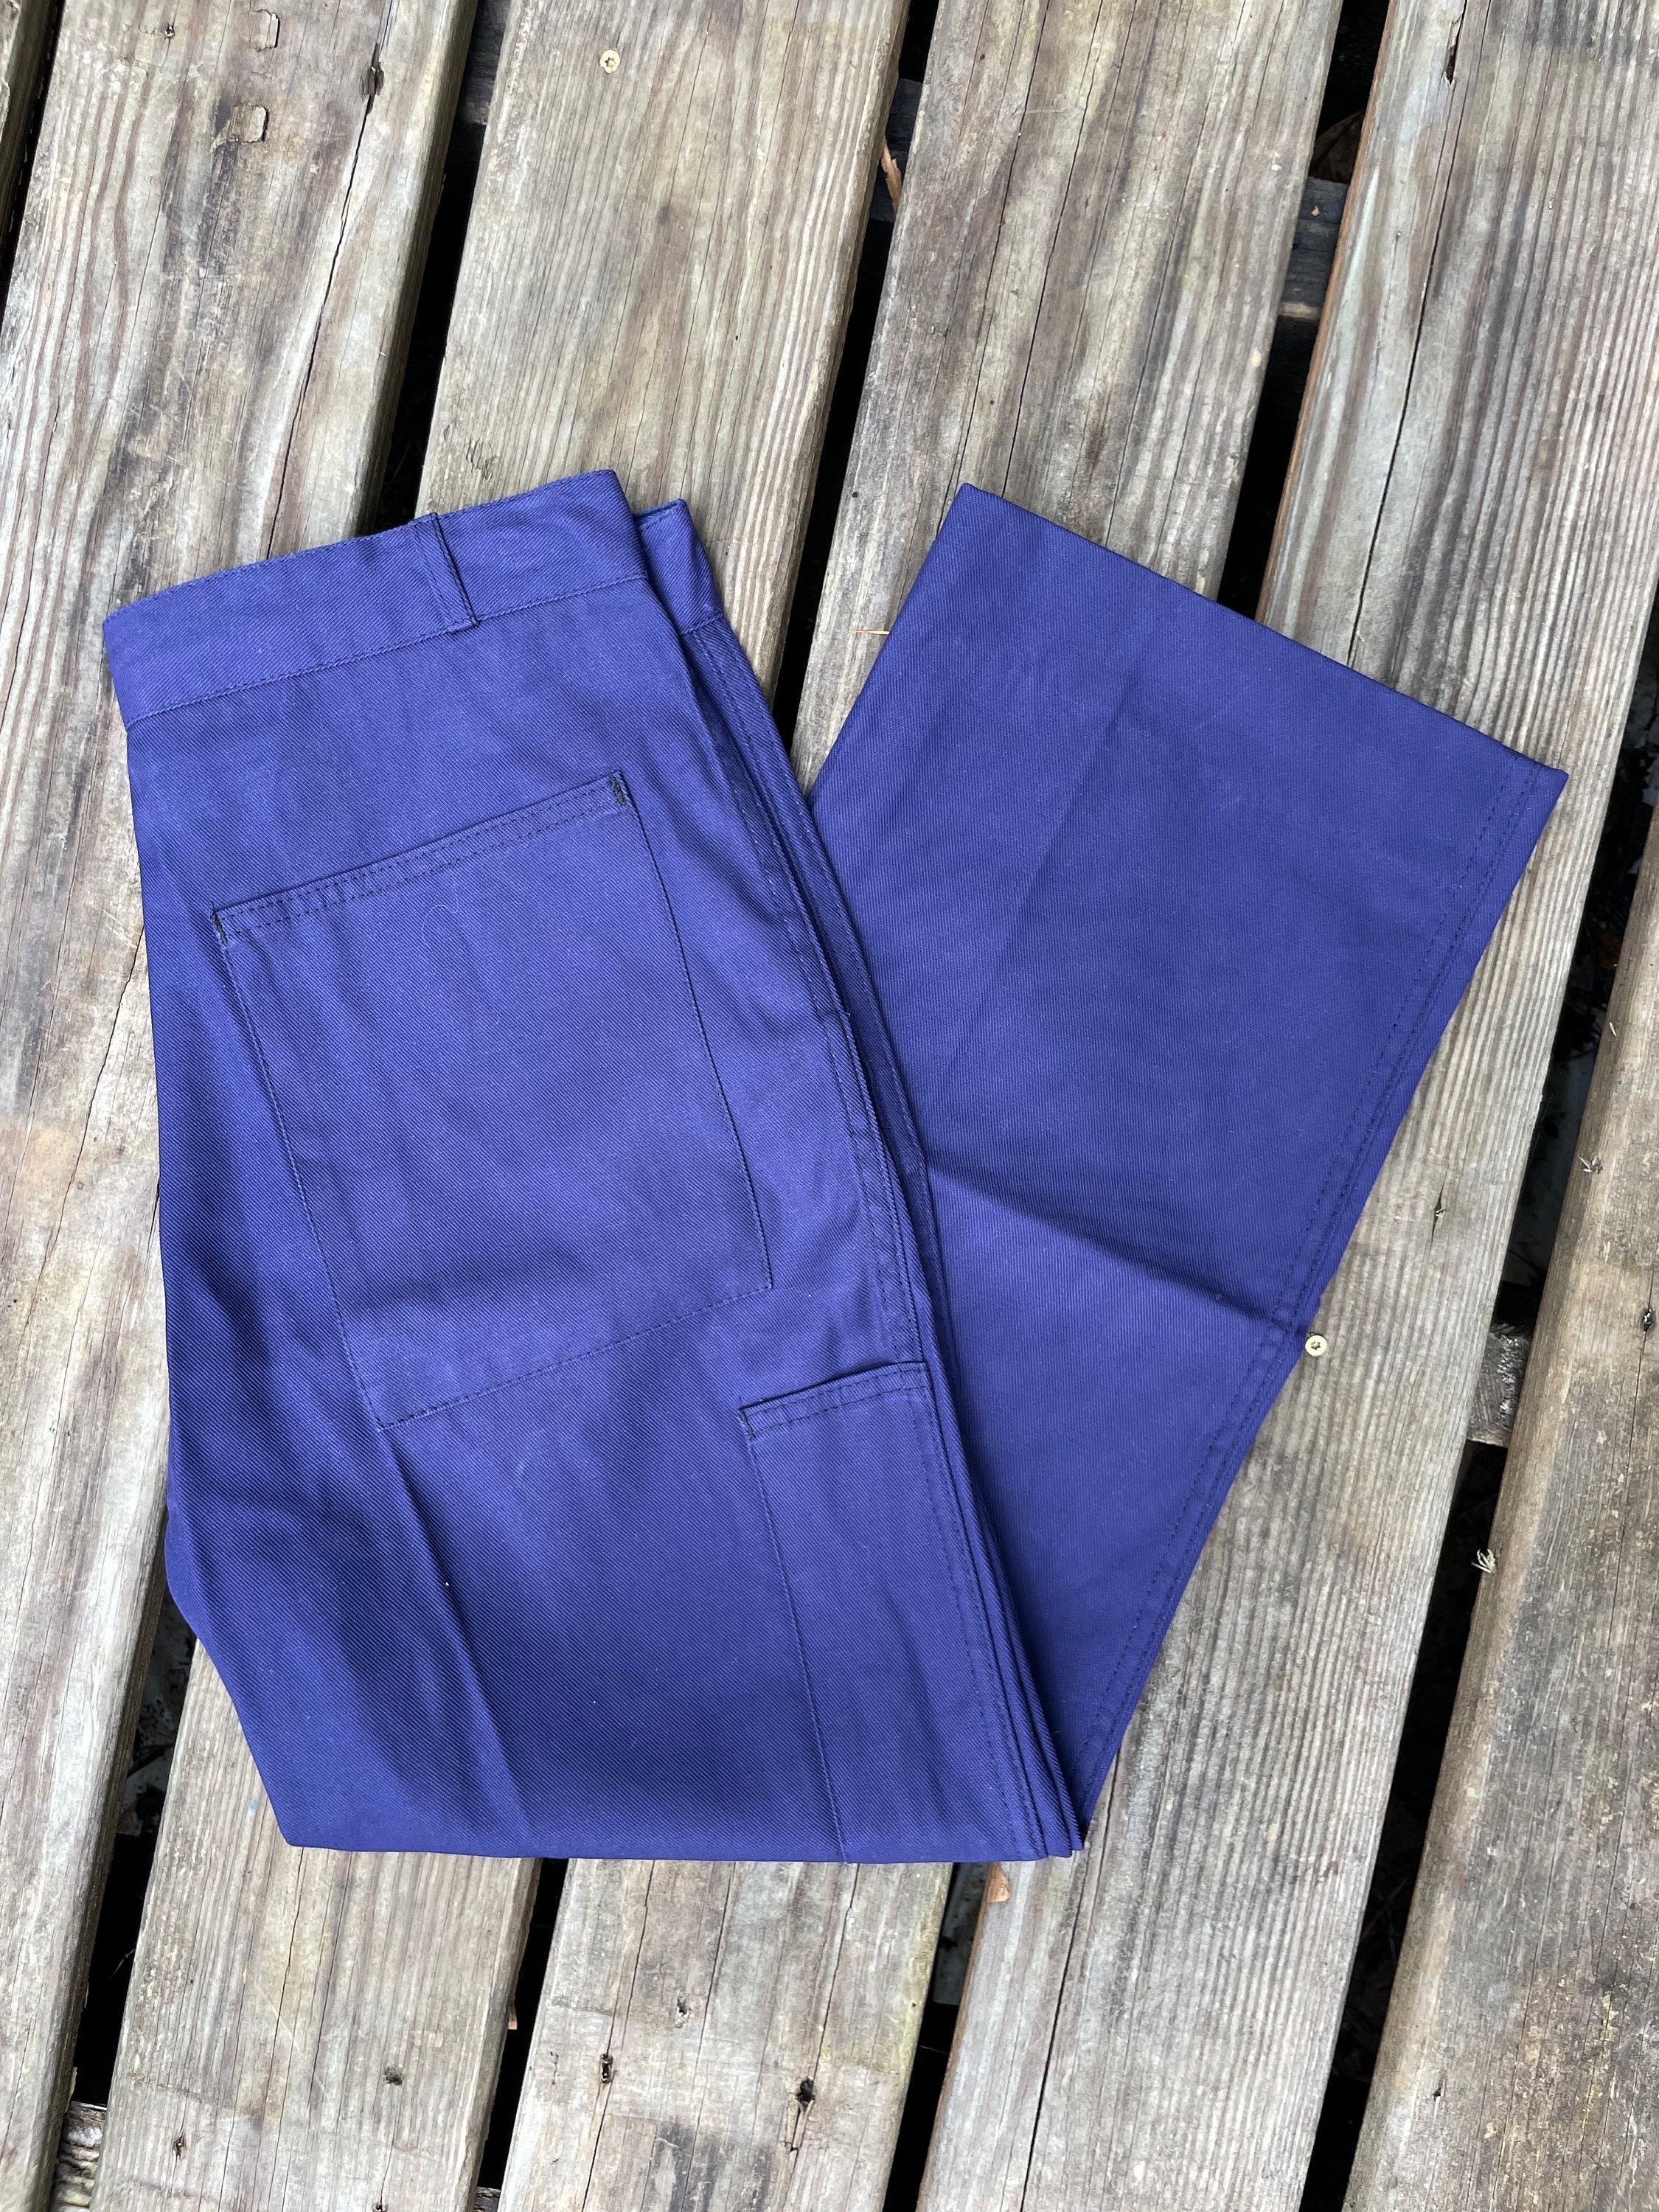 French Vintage Pants - Etsy